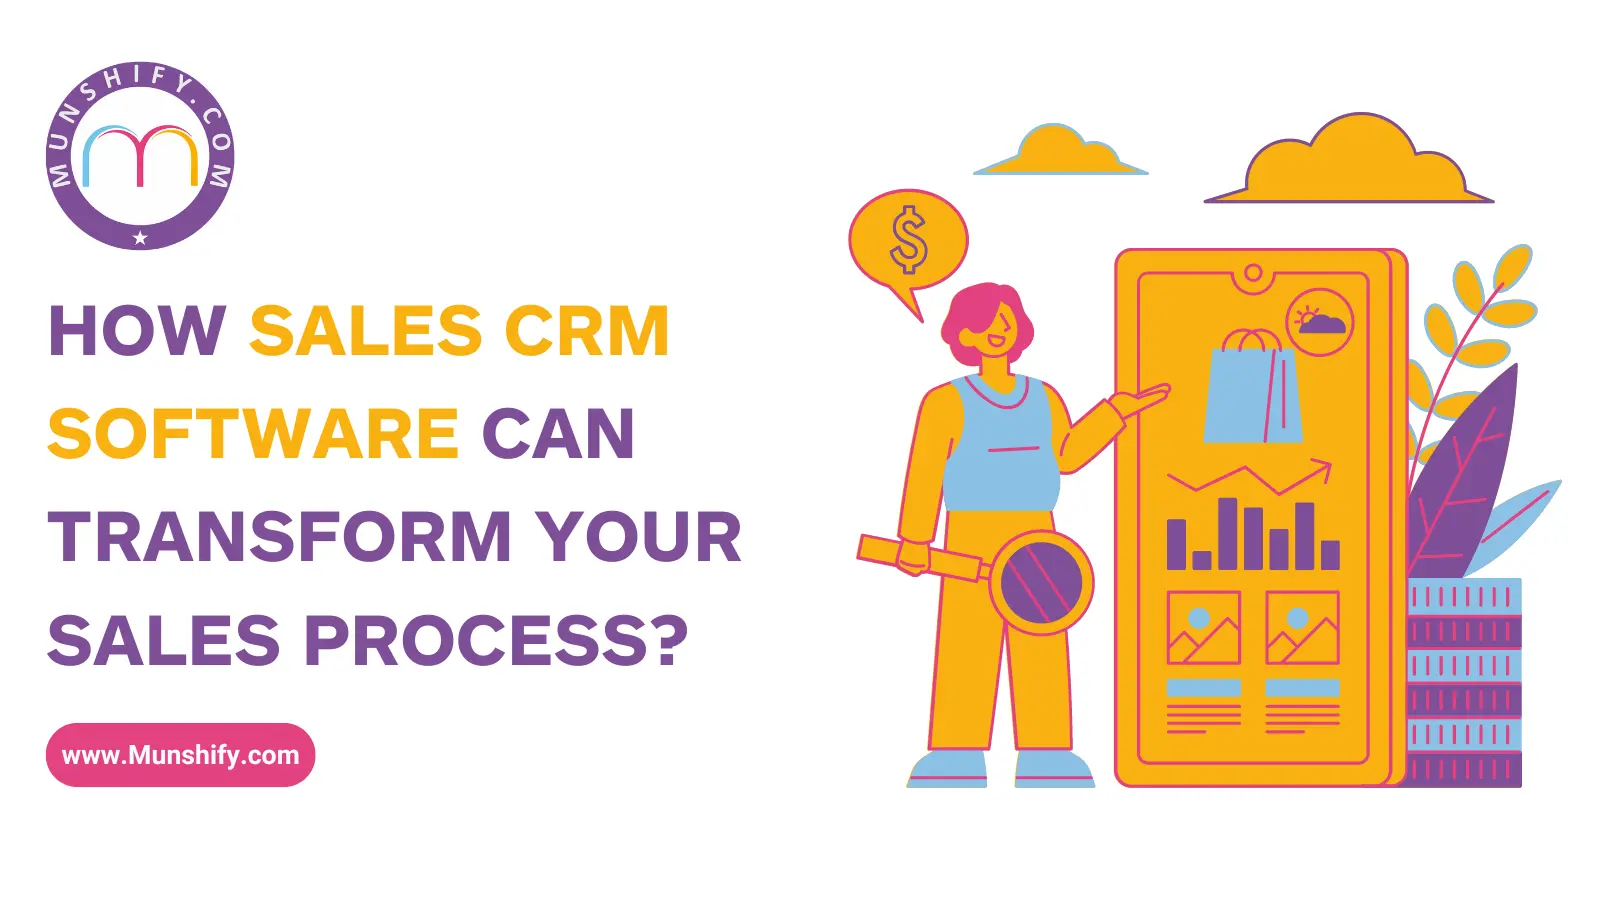 How Sales CRM Software Can Transform Your Sales Process?